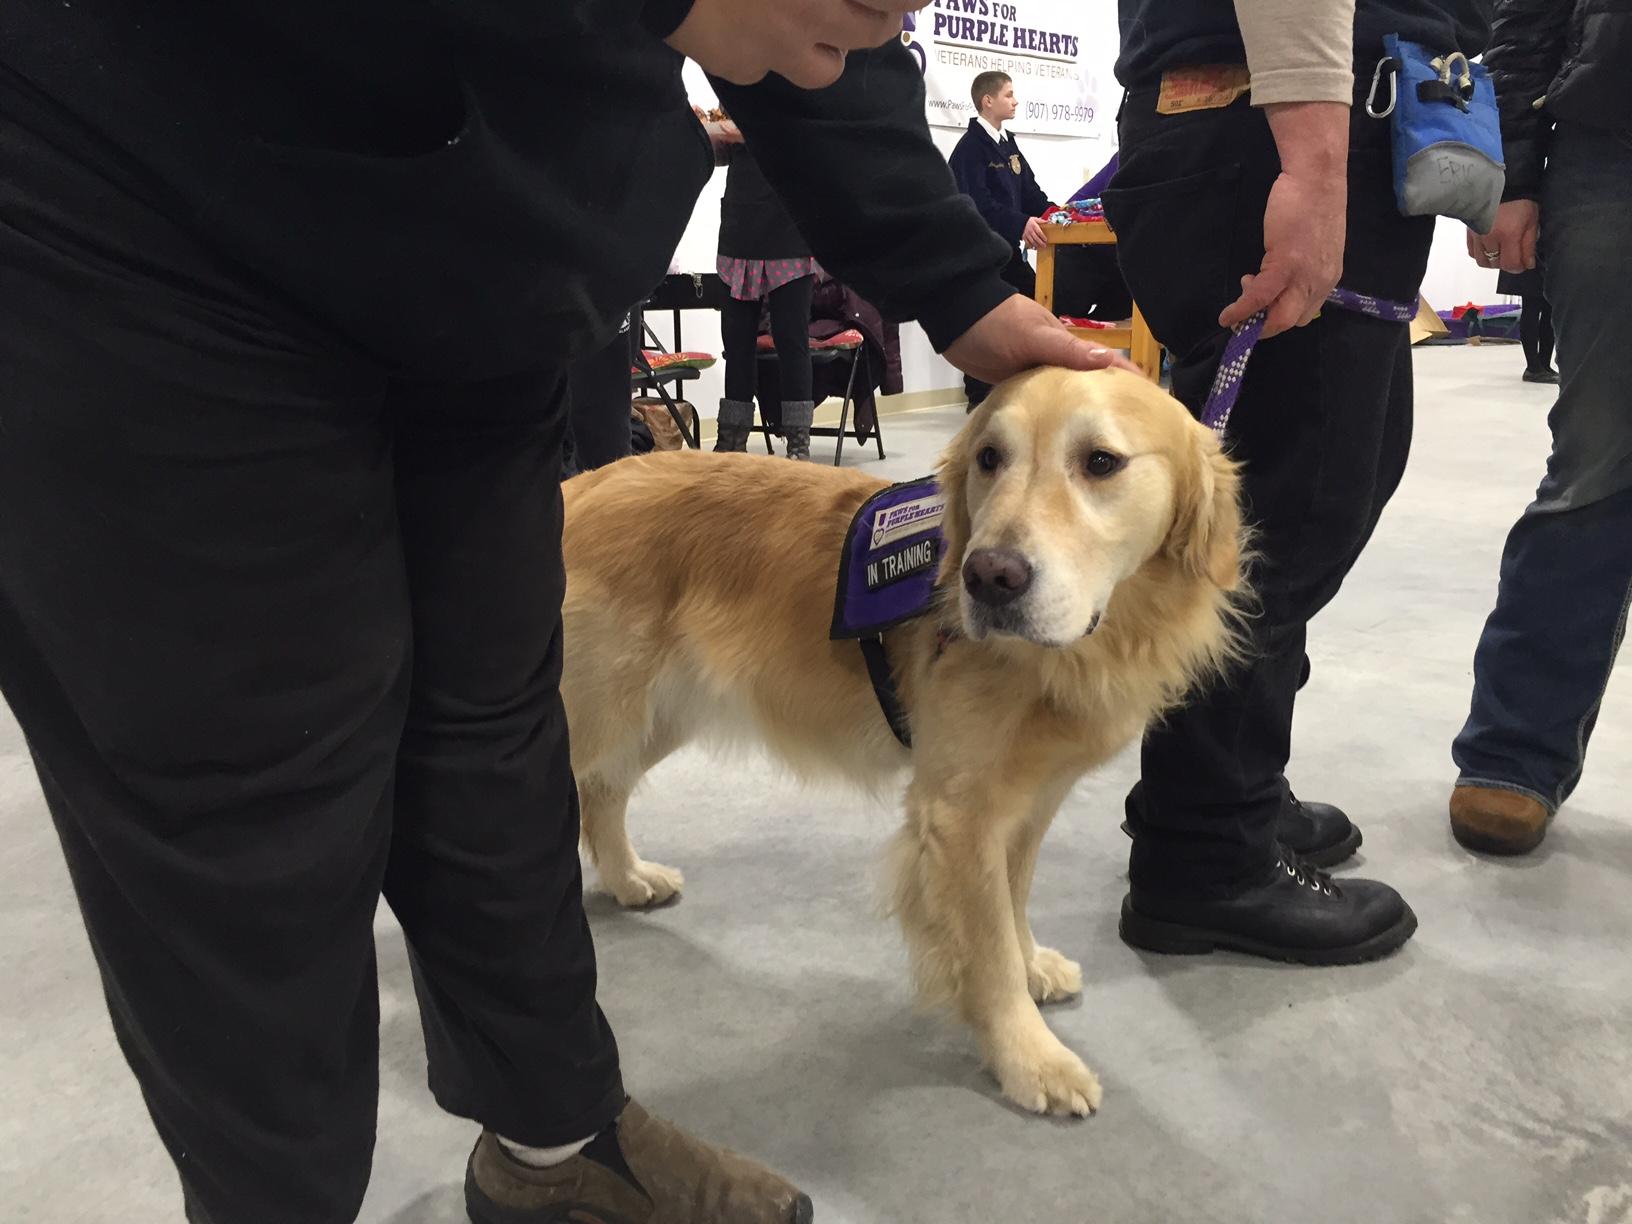 A Paws For Purple Hearts service dog greets visitors during an open house at the group's new training center in south Fairbanks November 12th. (Dan Bross, KUAC - Fairbanks)